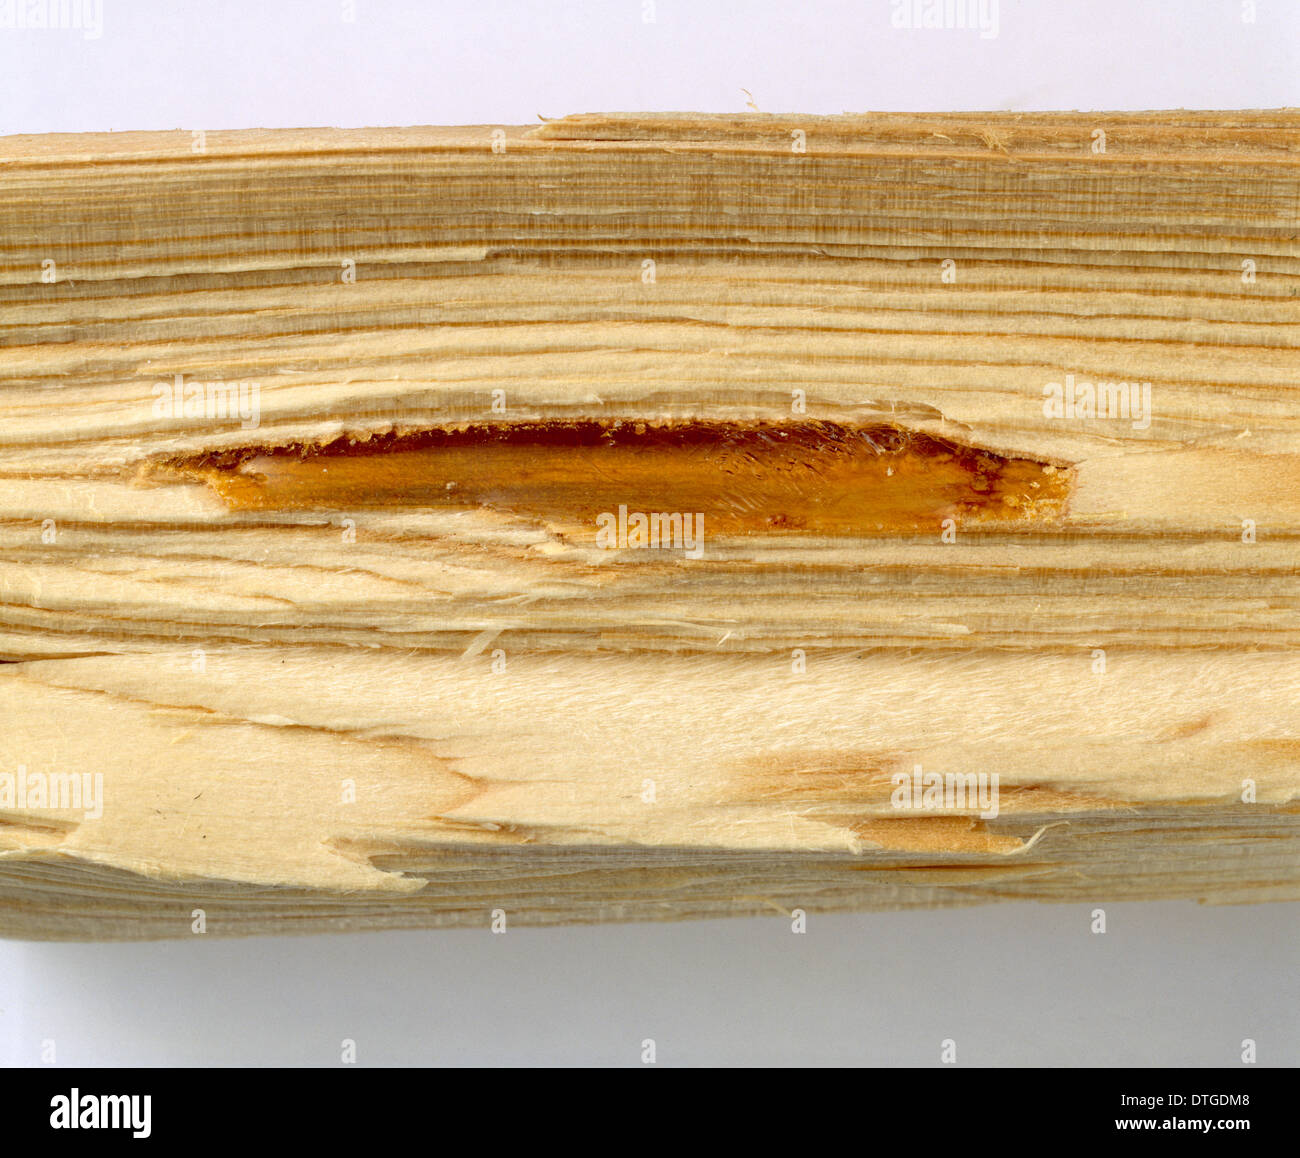 Pine wood with resin filled cavity Stock Photo